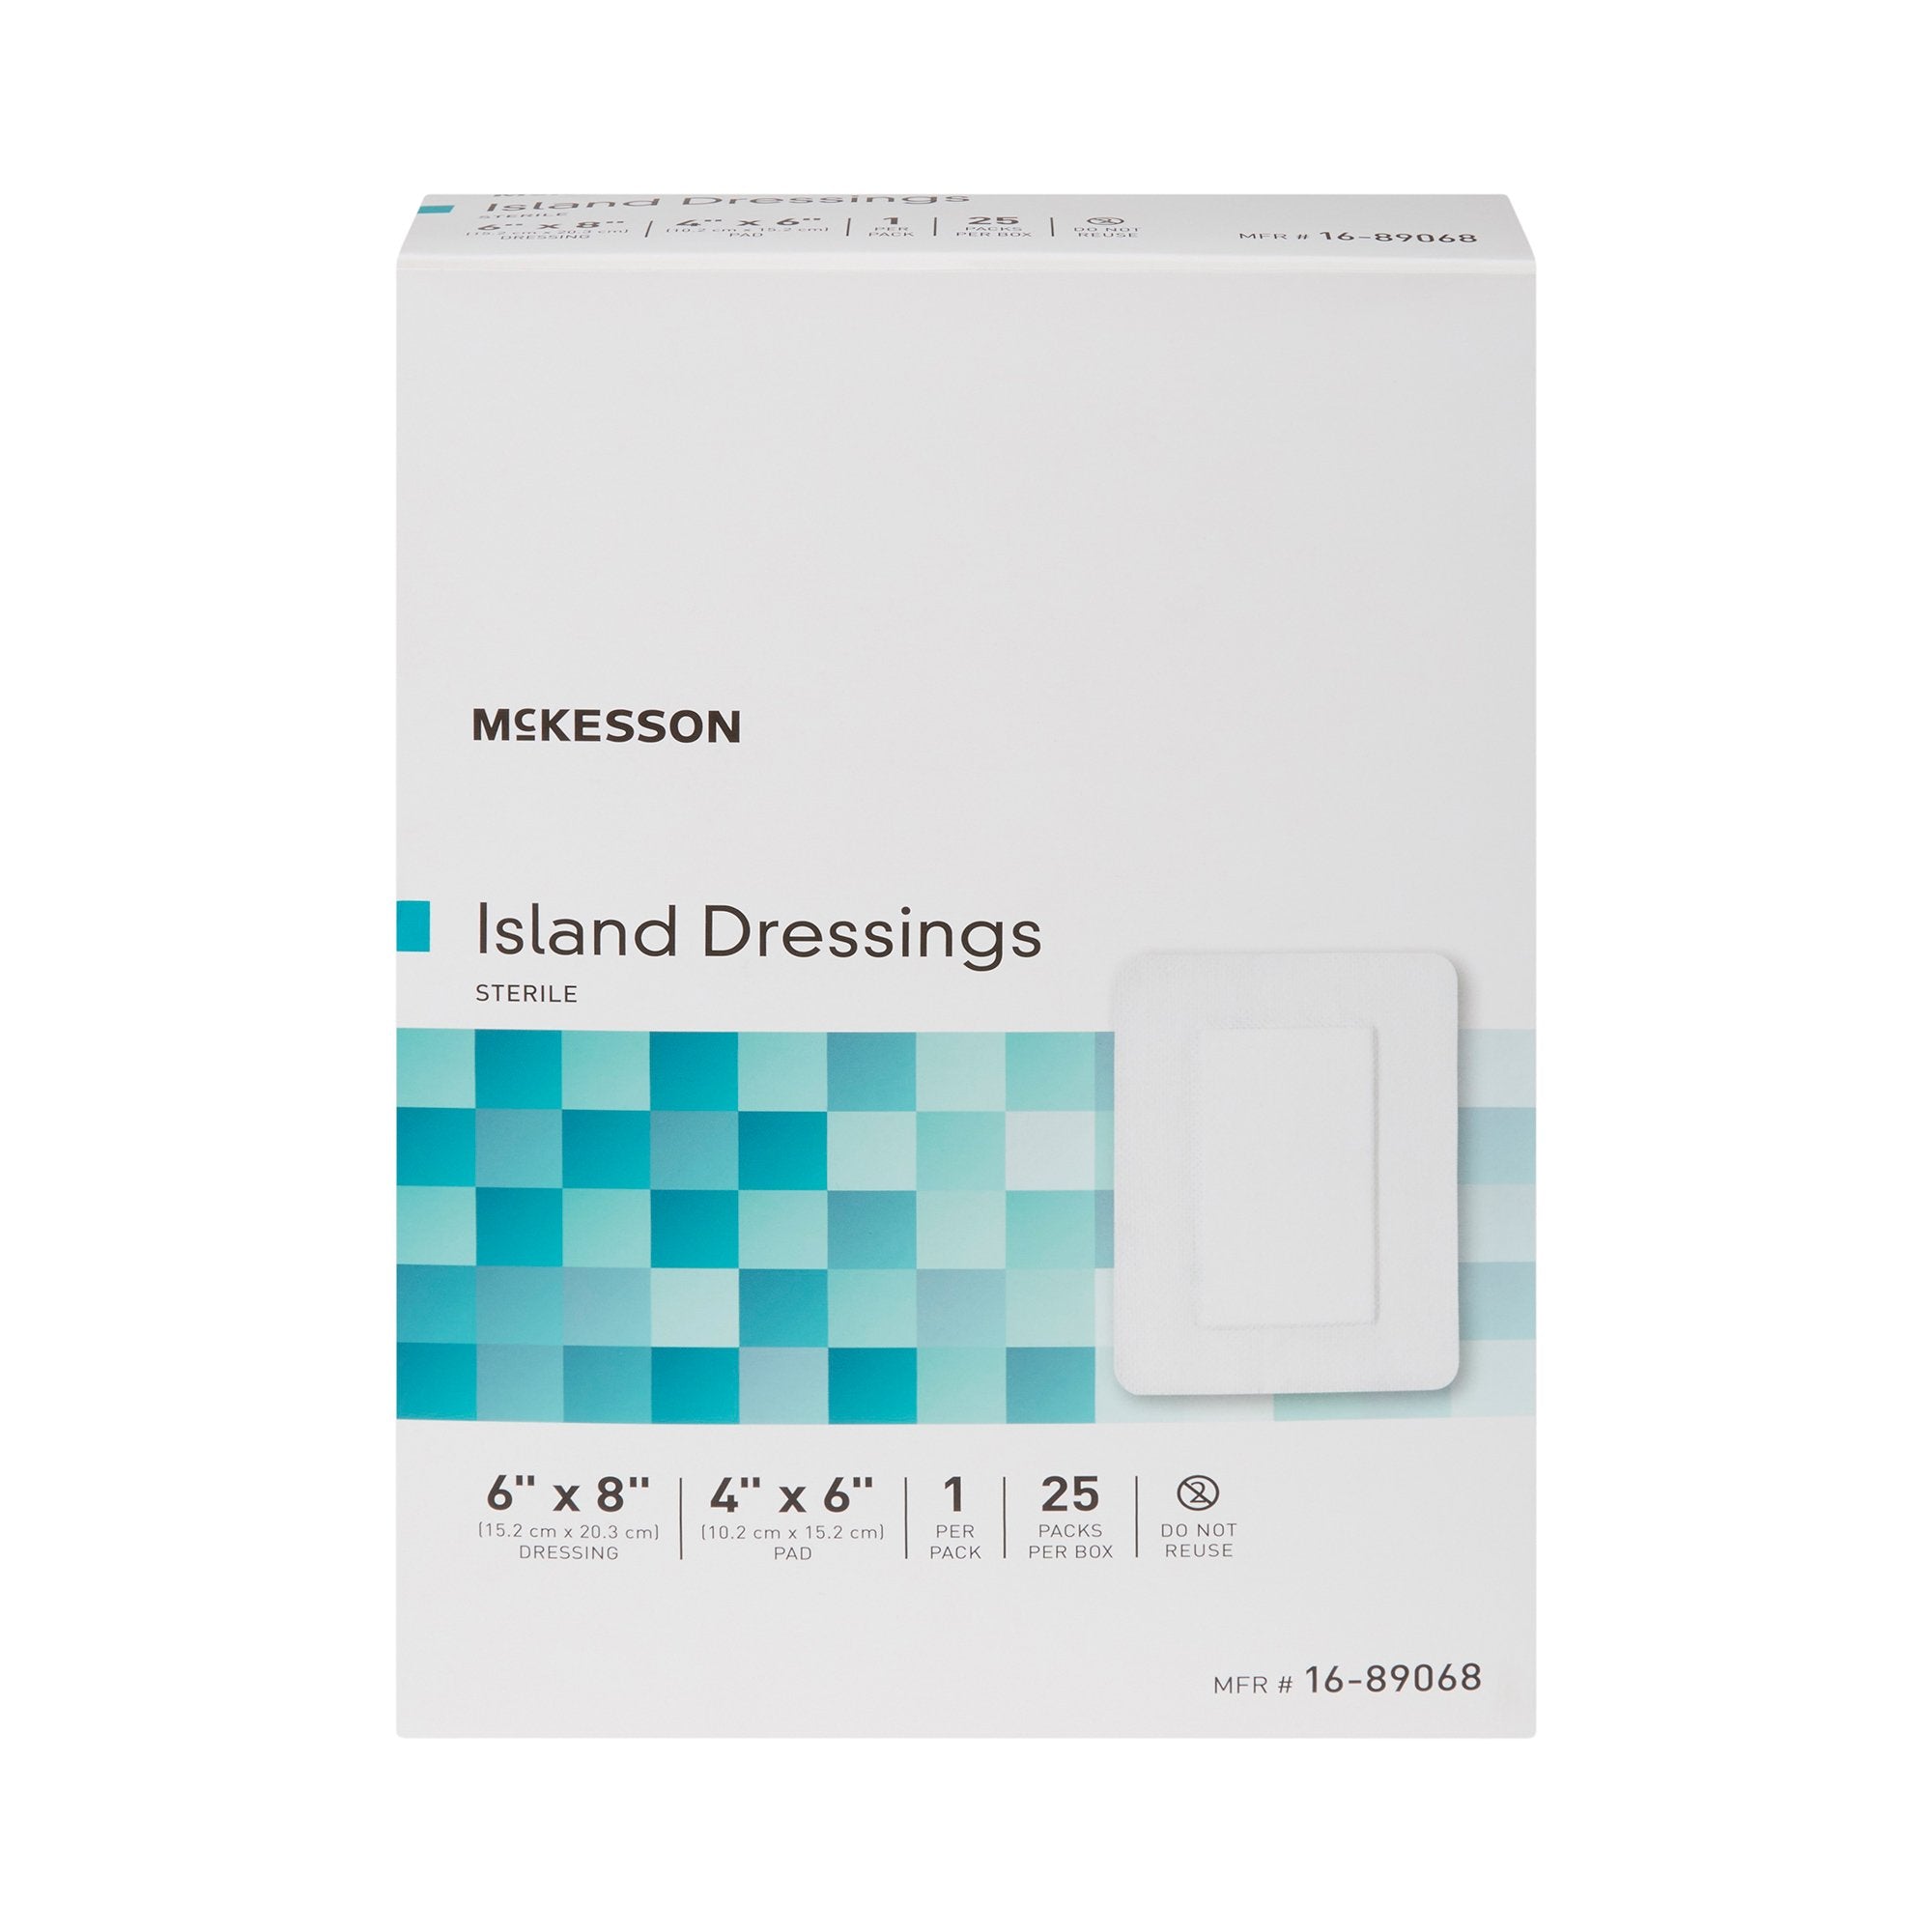 Adhesive Dressing McKesson 6 X 8 Inch Polypropylene / Rayon Rectangle White Sterile